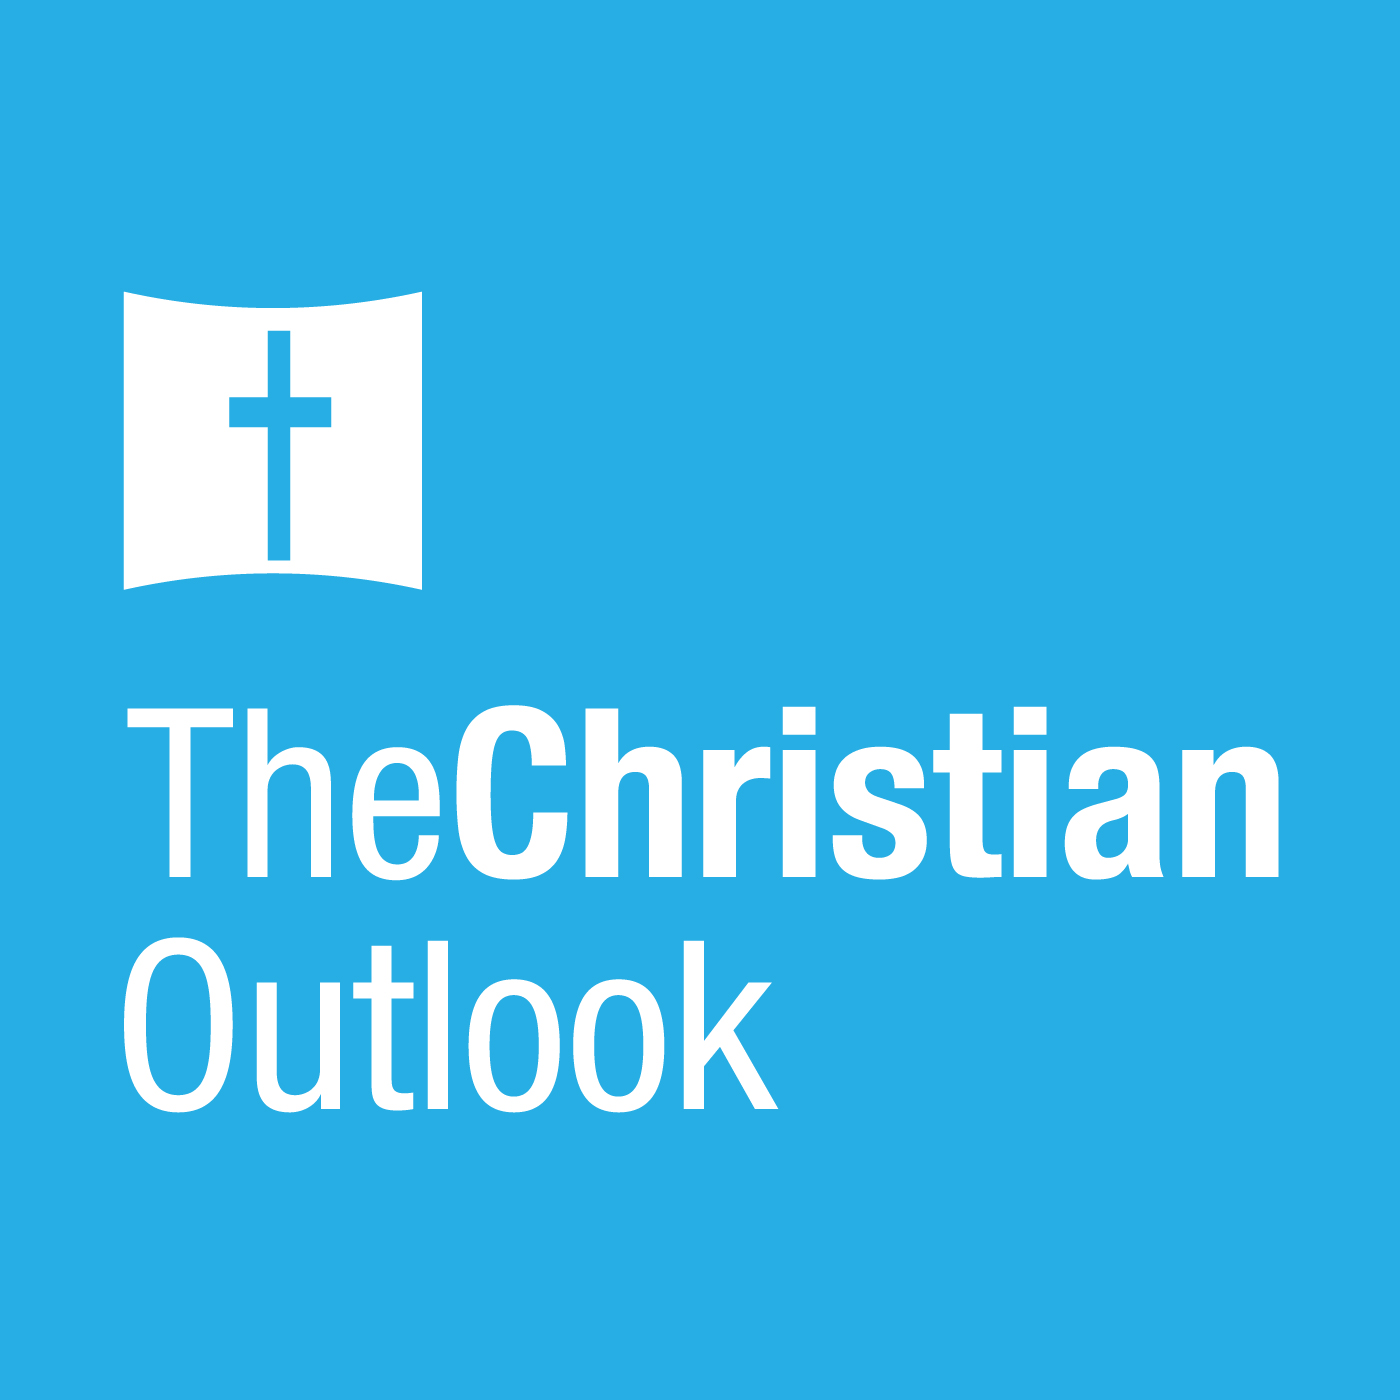 TCO 3/11/17: A Look at Christian Refugees